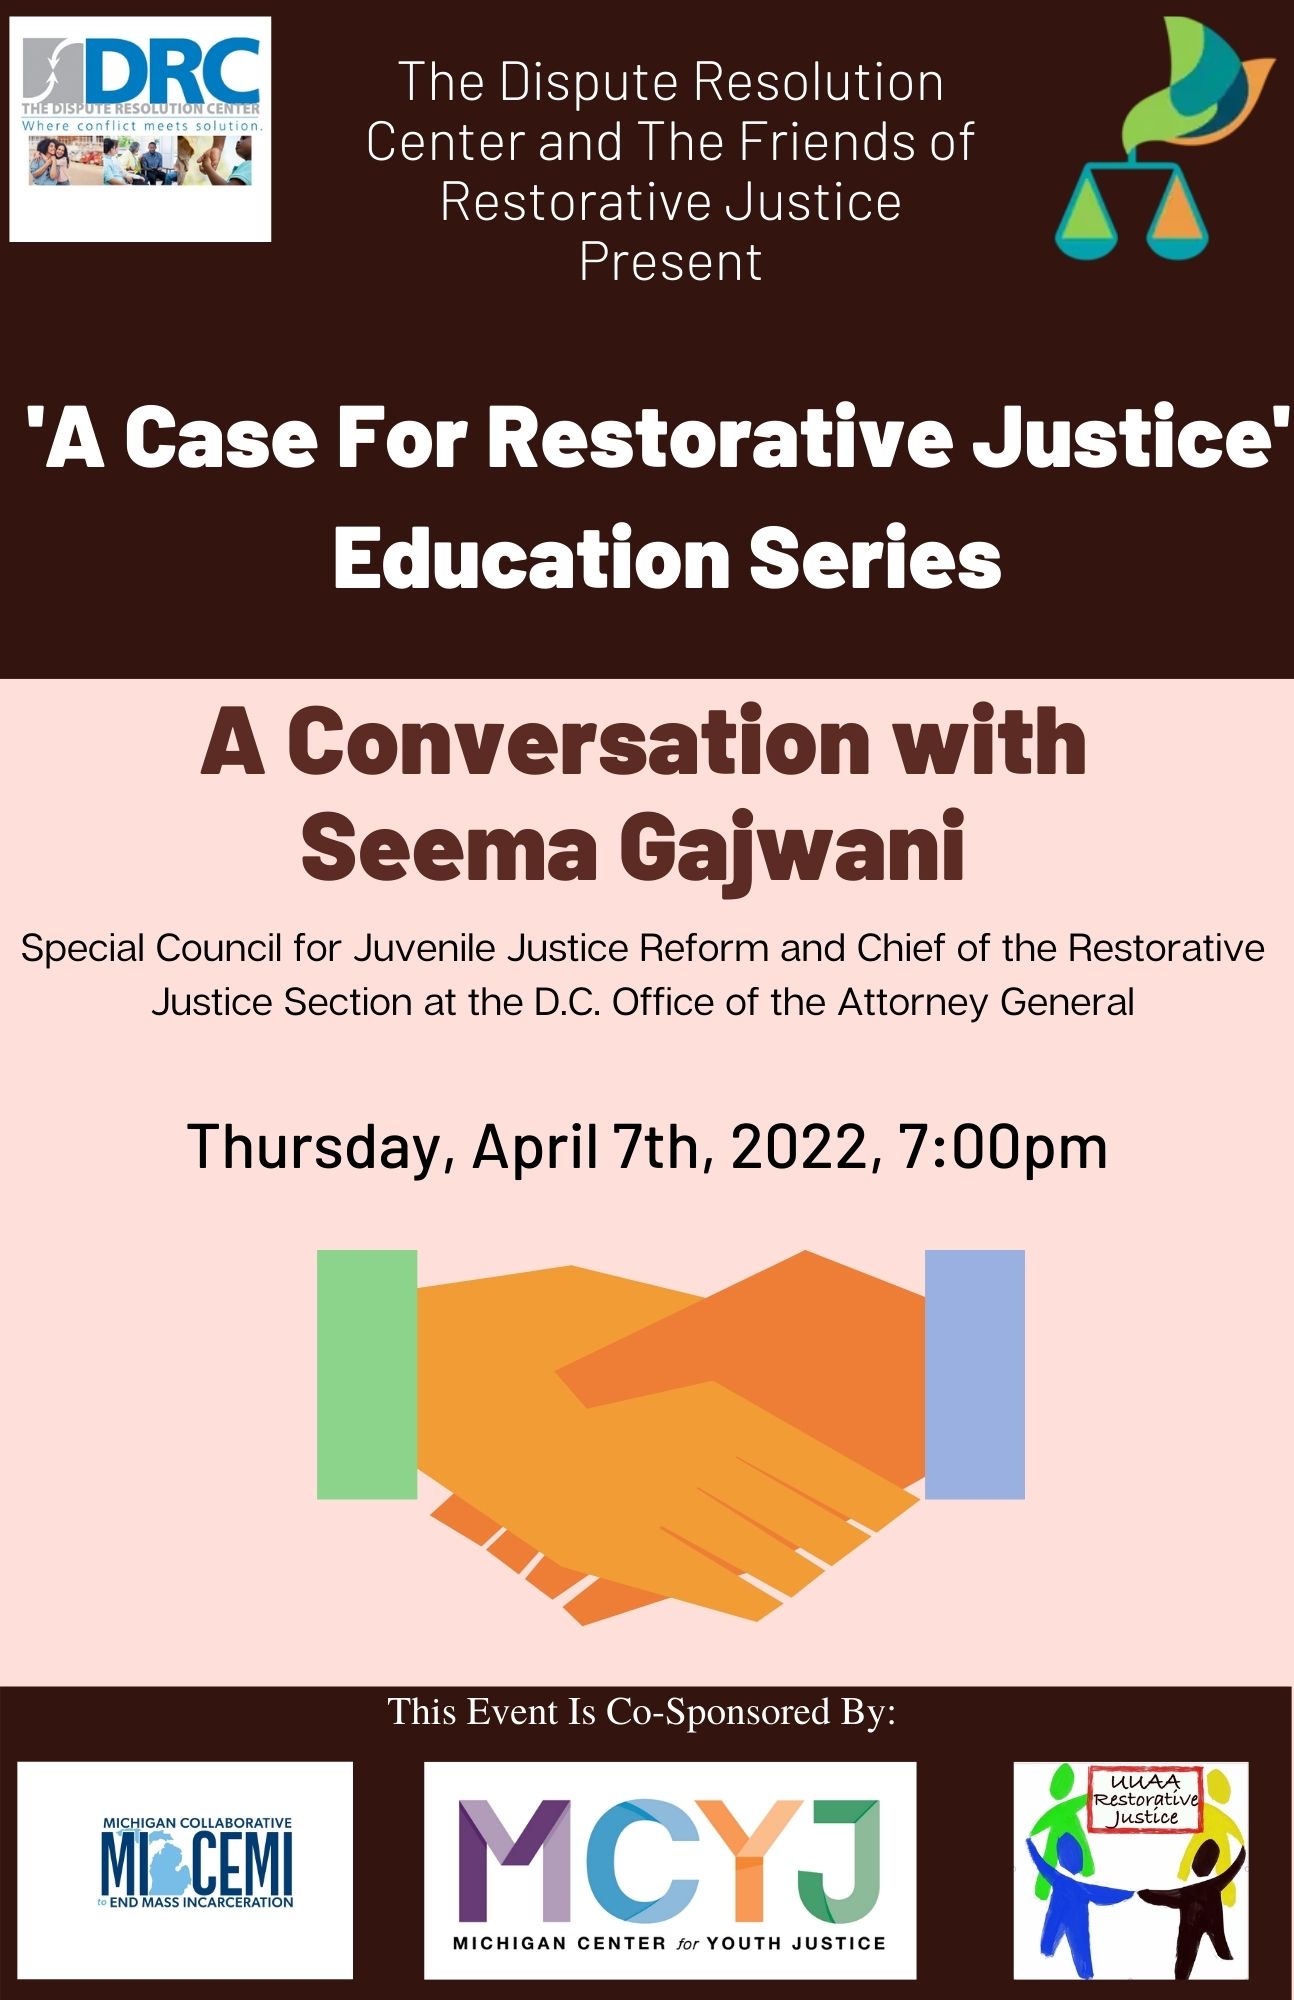 A Case for Restorative Justice Education Series